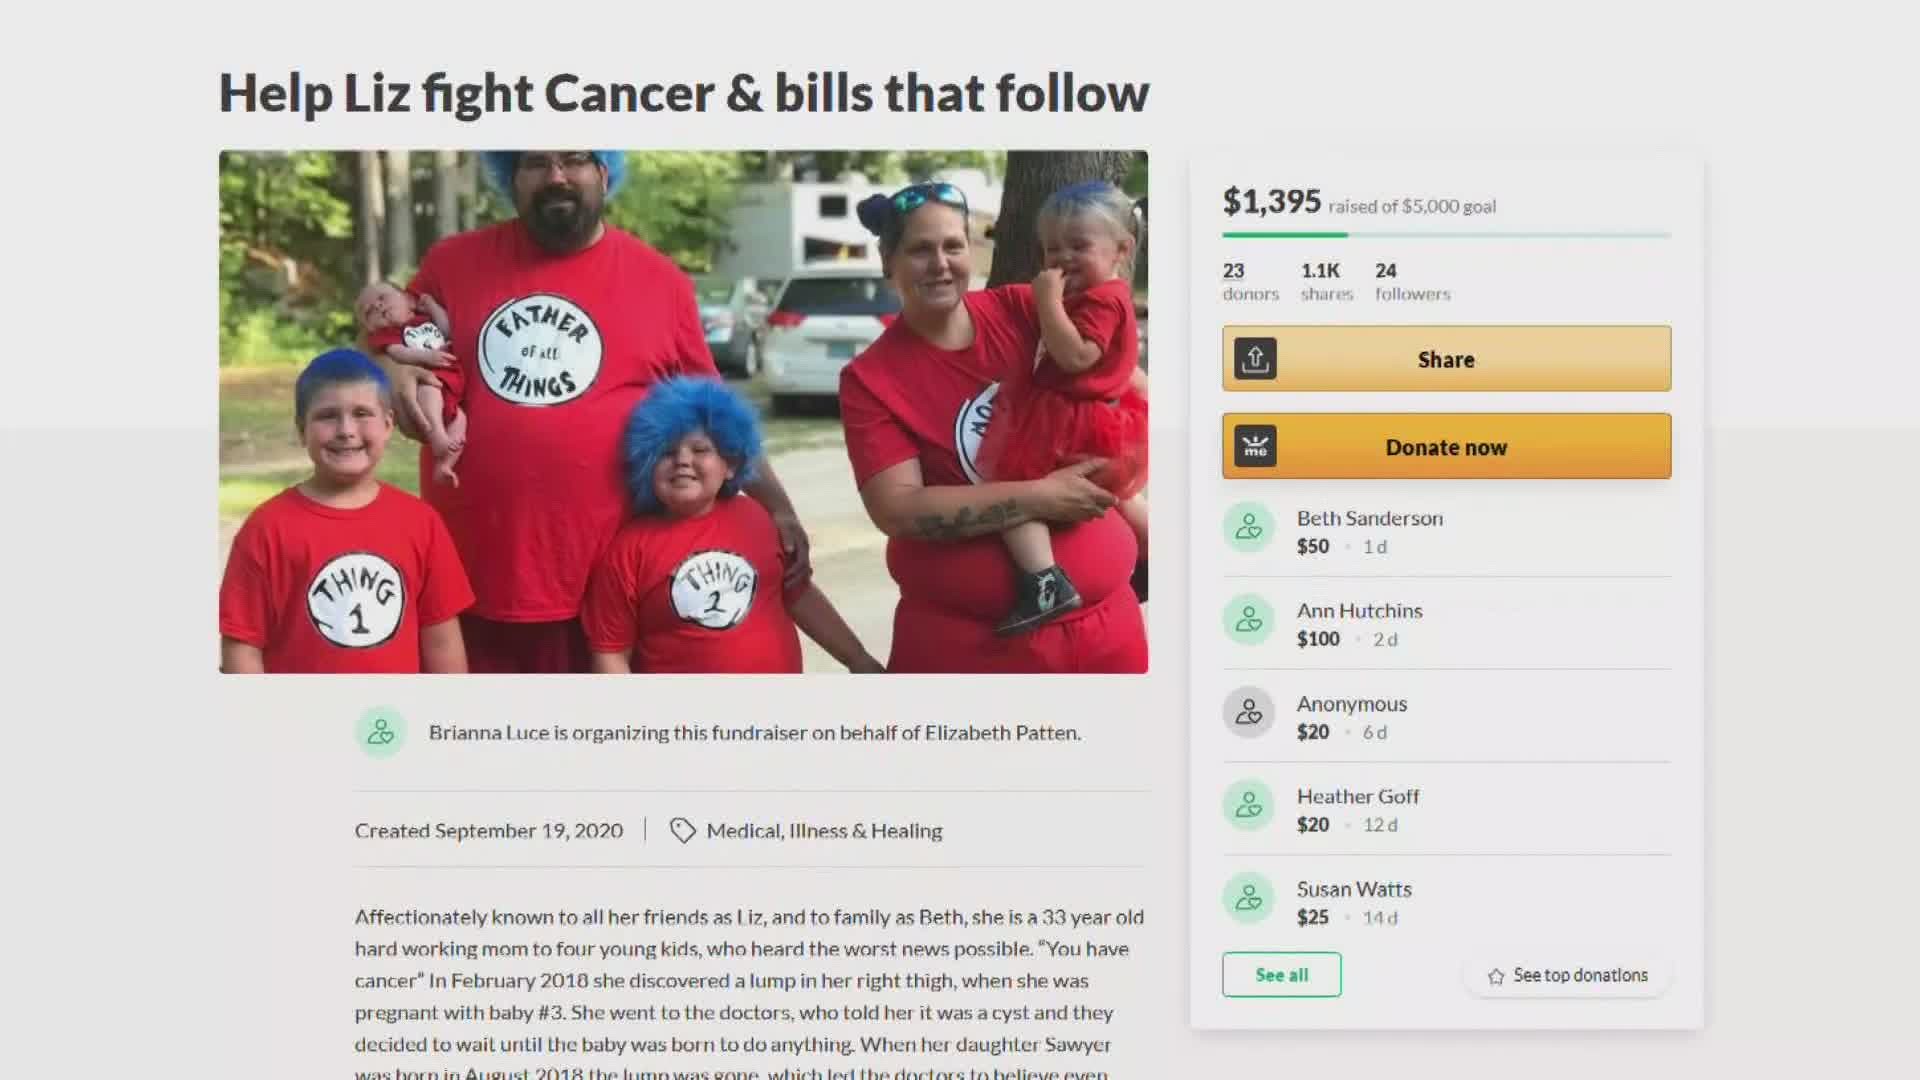 A community is rallying around a mother of four who is fighting a rare cancer.